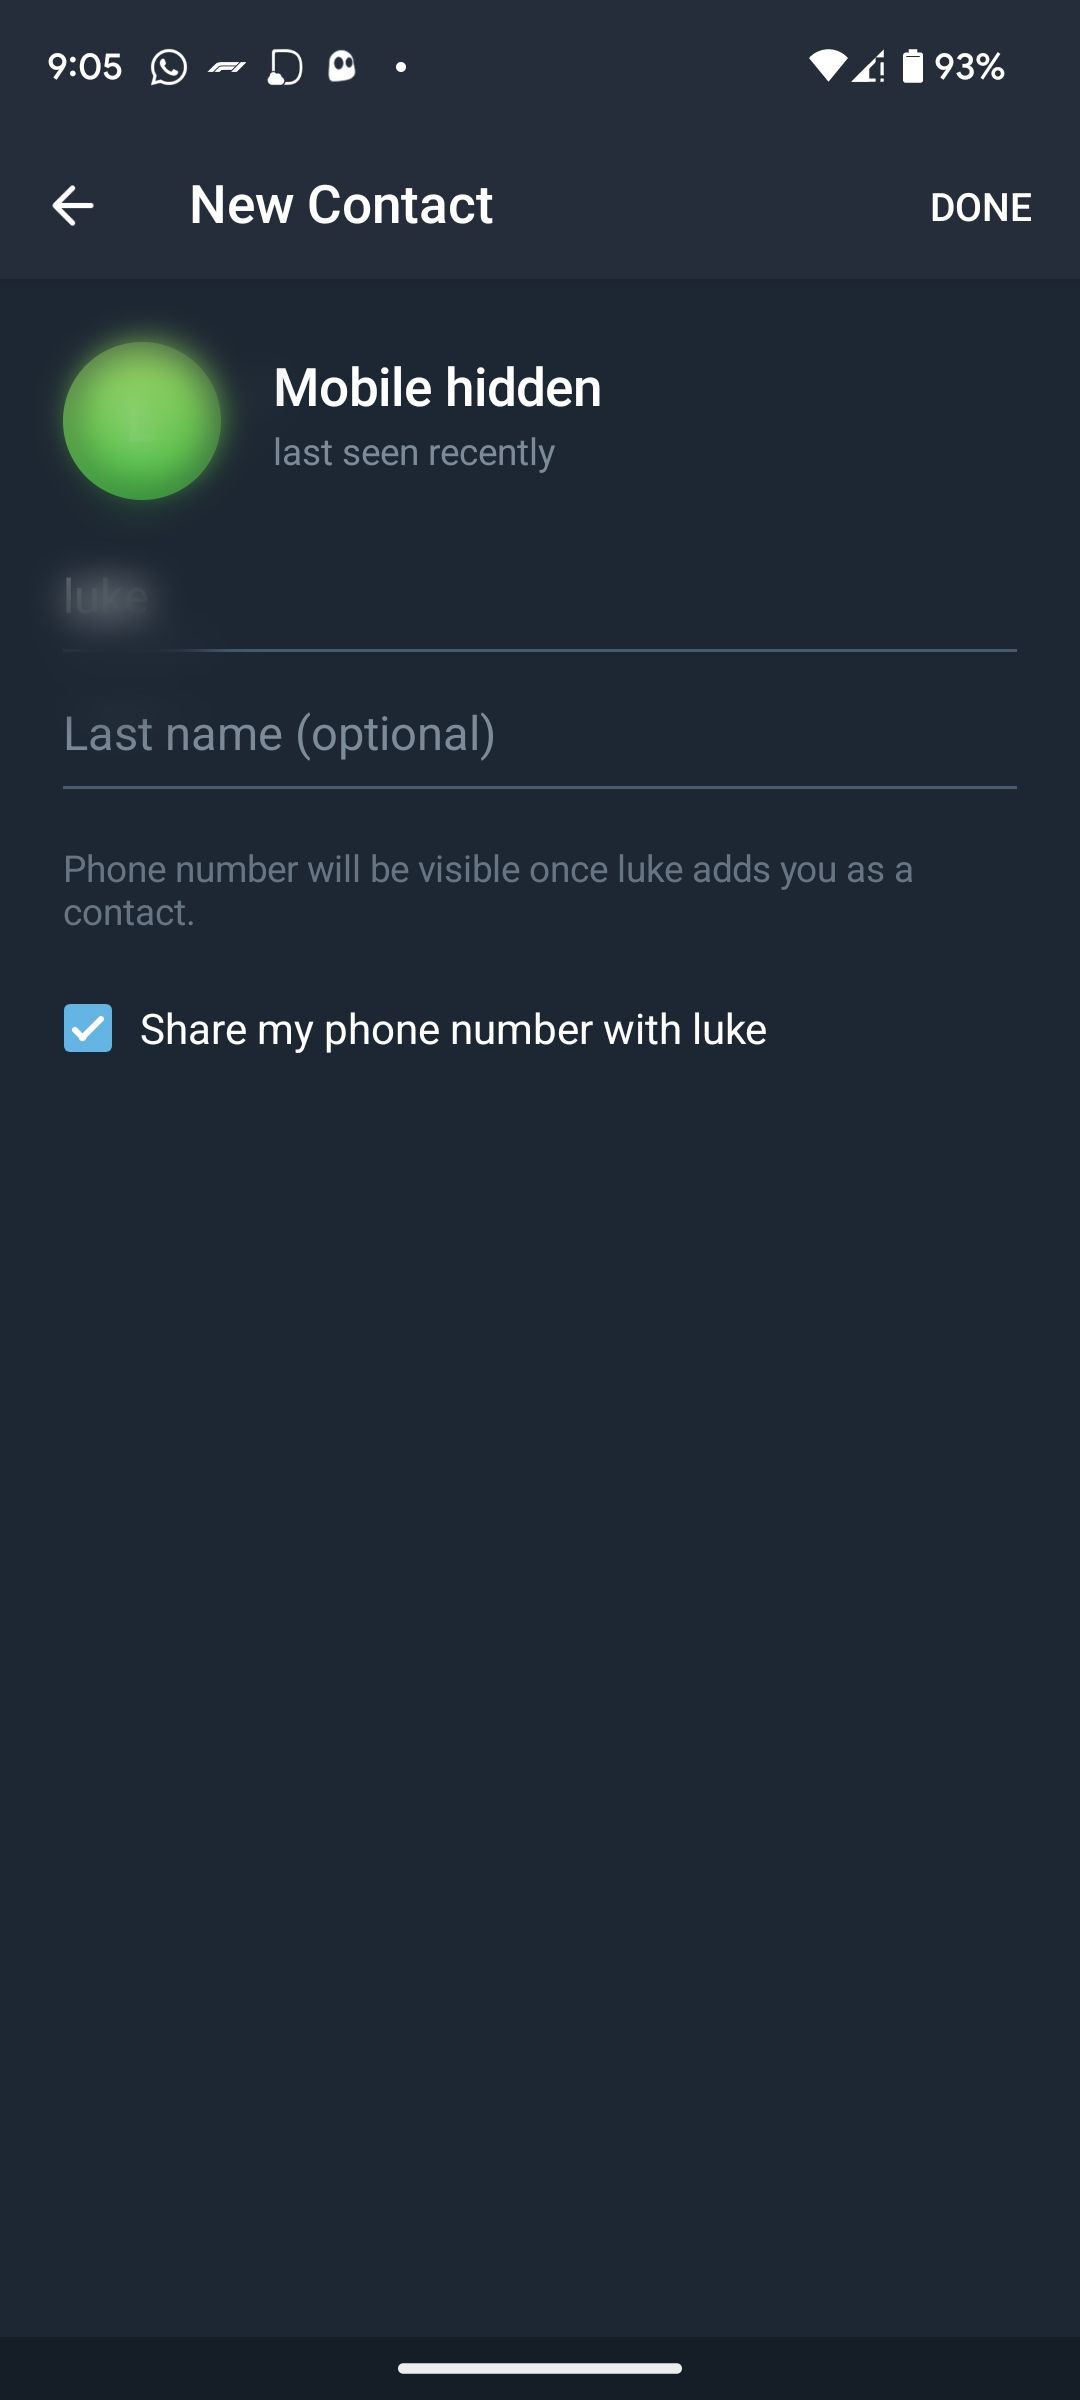 Adding a new contact on Telegram Android via username